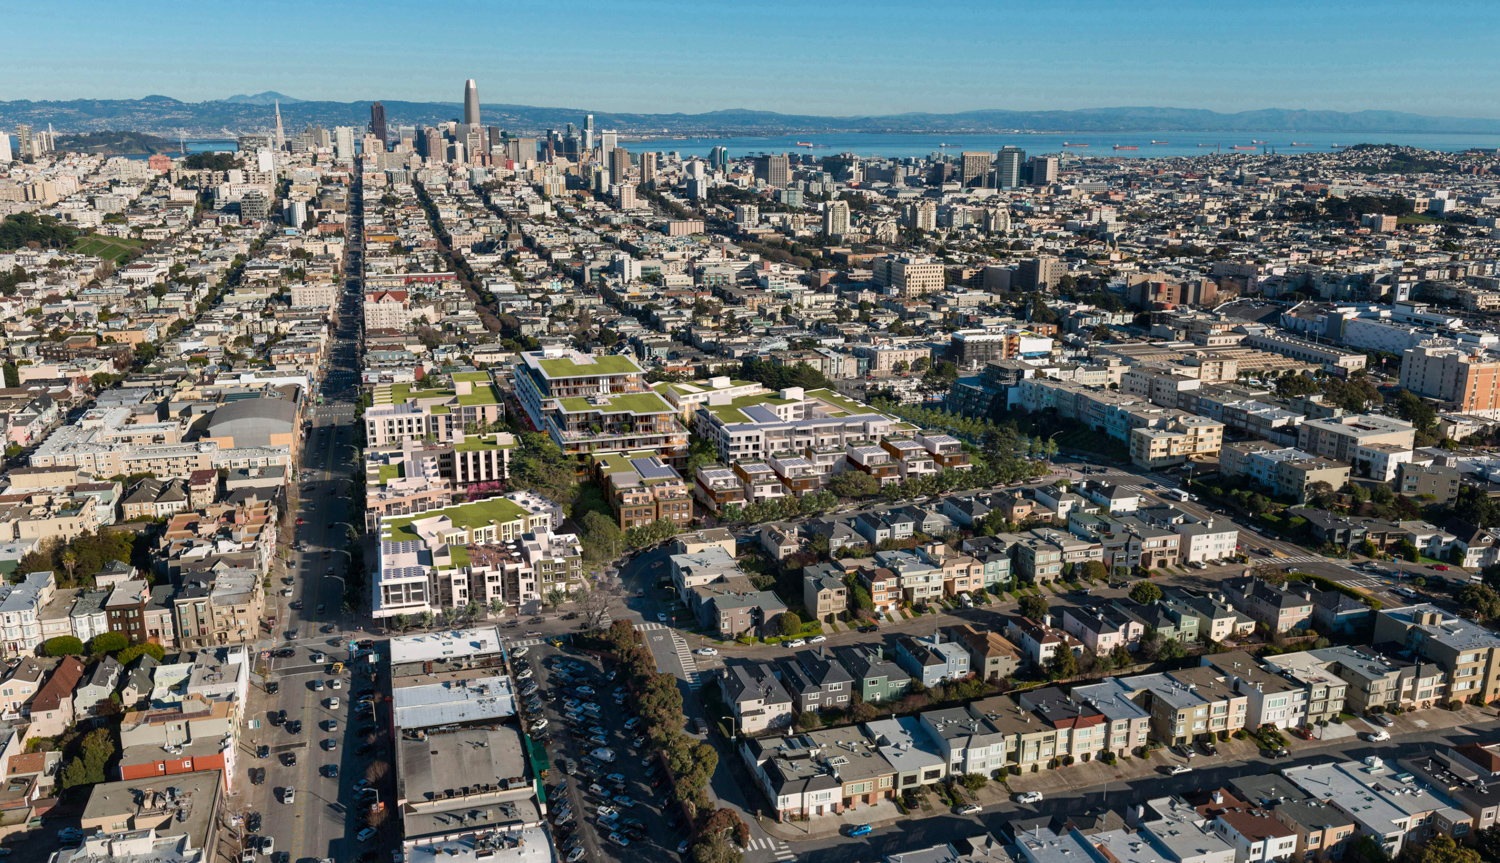 3333 California Street aerial perspective looking towards downtown